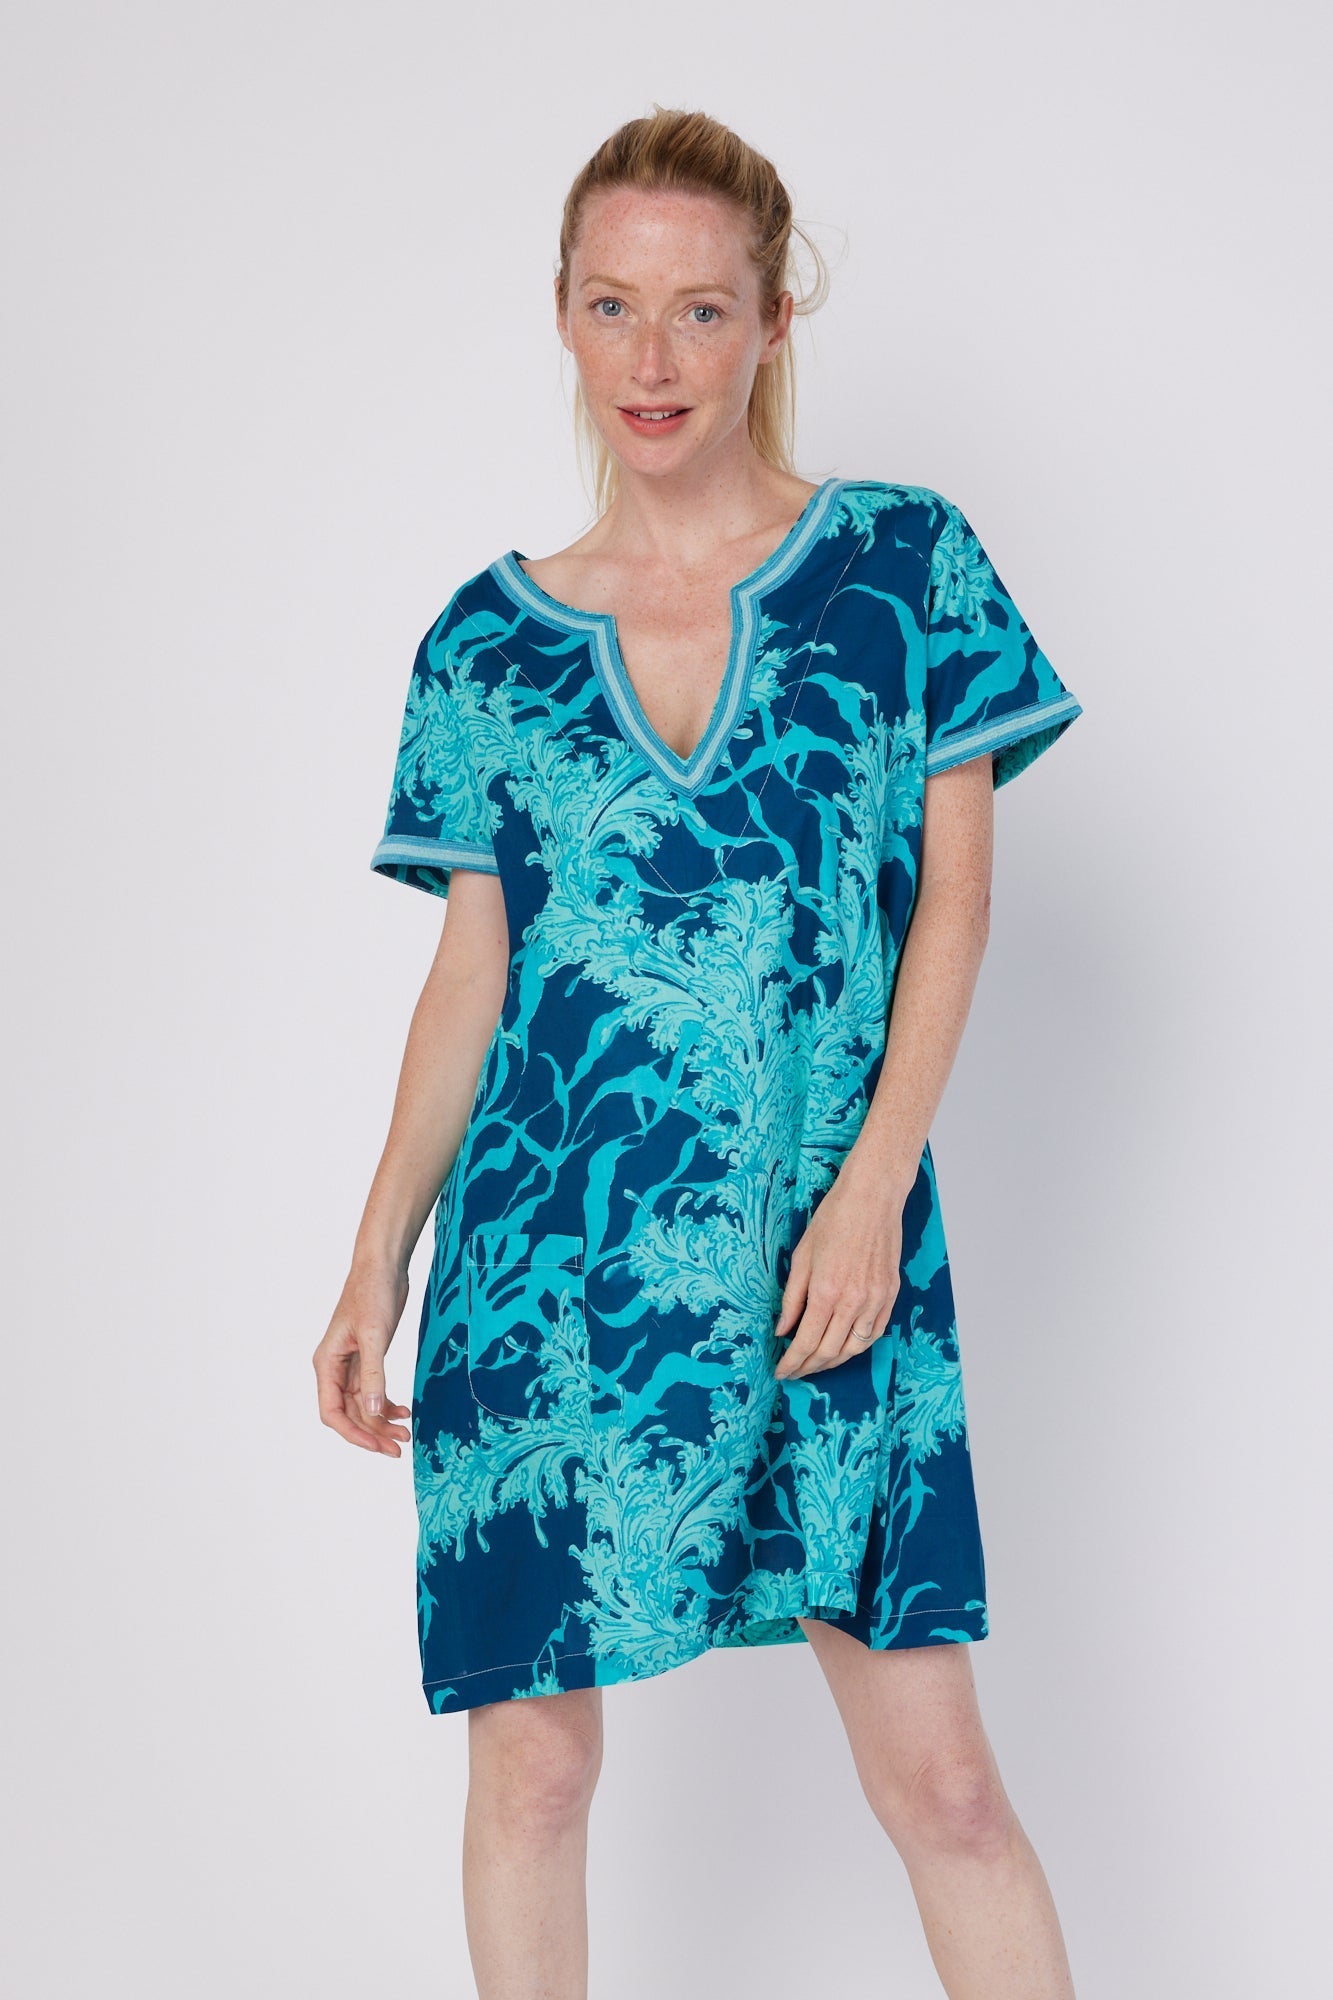 ModaPosa Giovanna 3/4 Bell Sleeve Embroidered Knee Length Caftan Dress in Navy Aqua Coral. Discover women's resort dresses and lifestyle clothing inspired by the Mediterranean. Free worldwide shipping available!